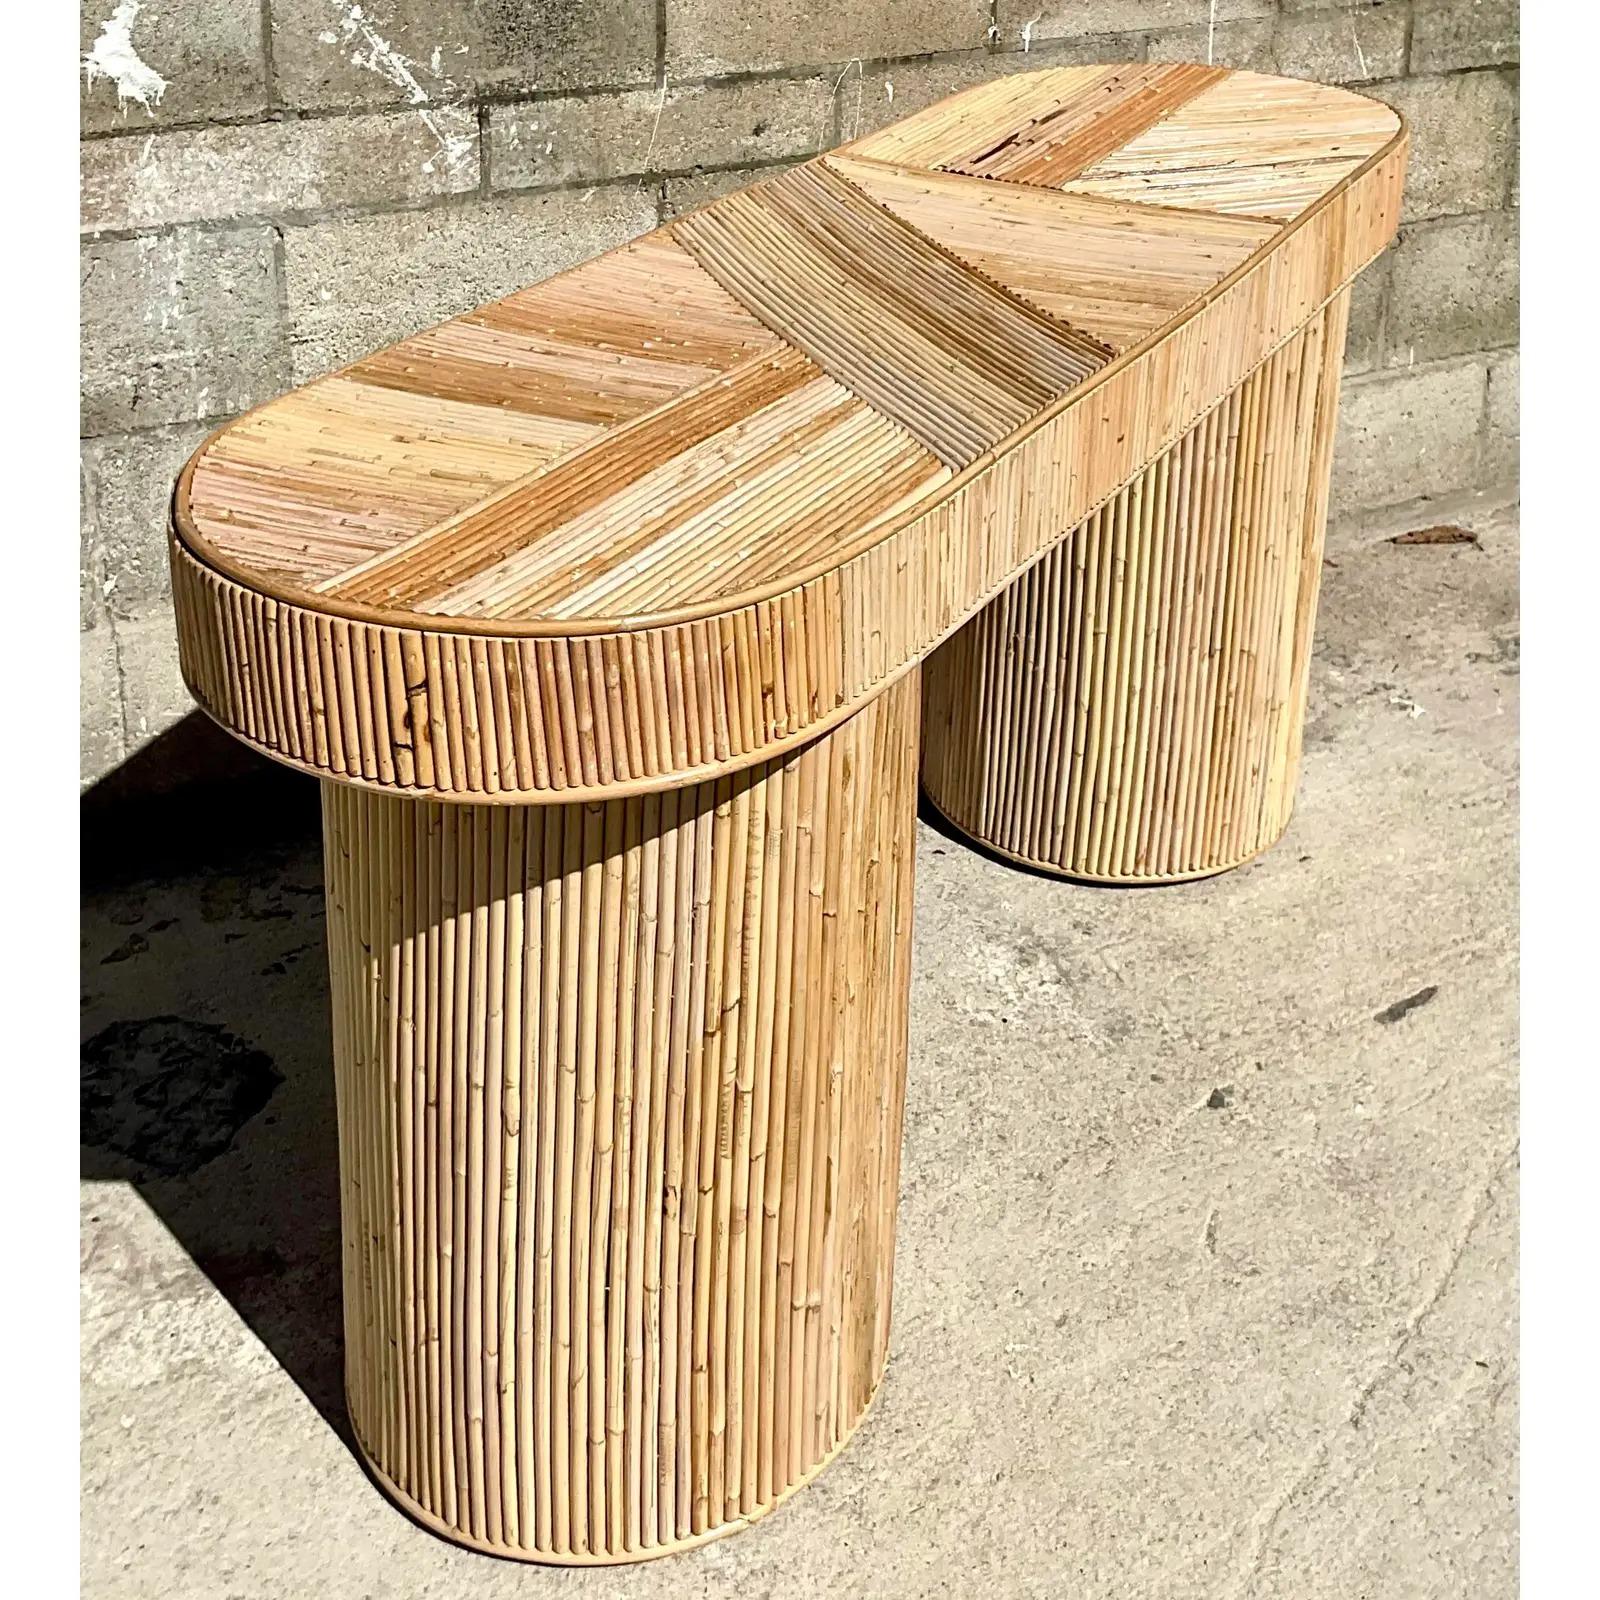 Spectacular vintage Coastal console table. Beautiful pencil reed construction in a chic oval design. A multi directional design gives it a Contemporary and Coastal look. Acquired from a Palm Beach estate.